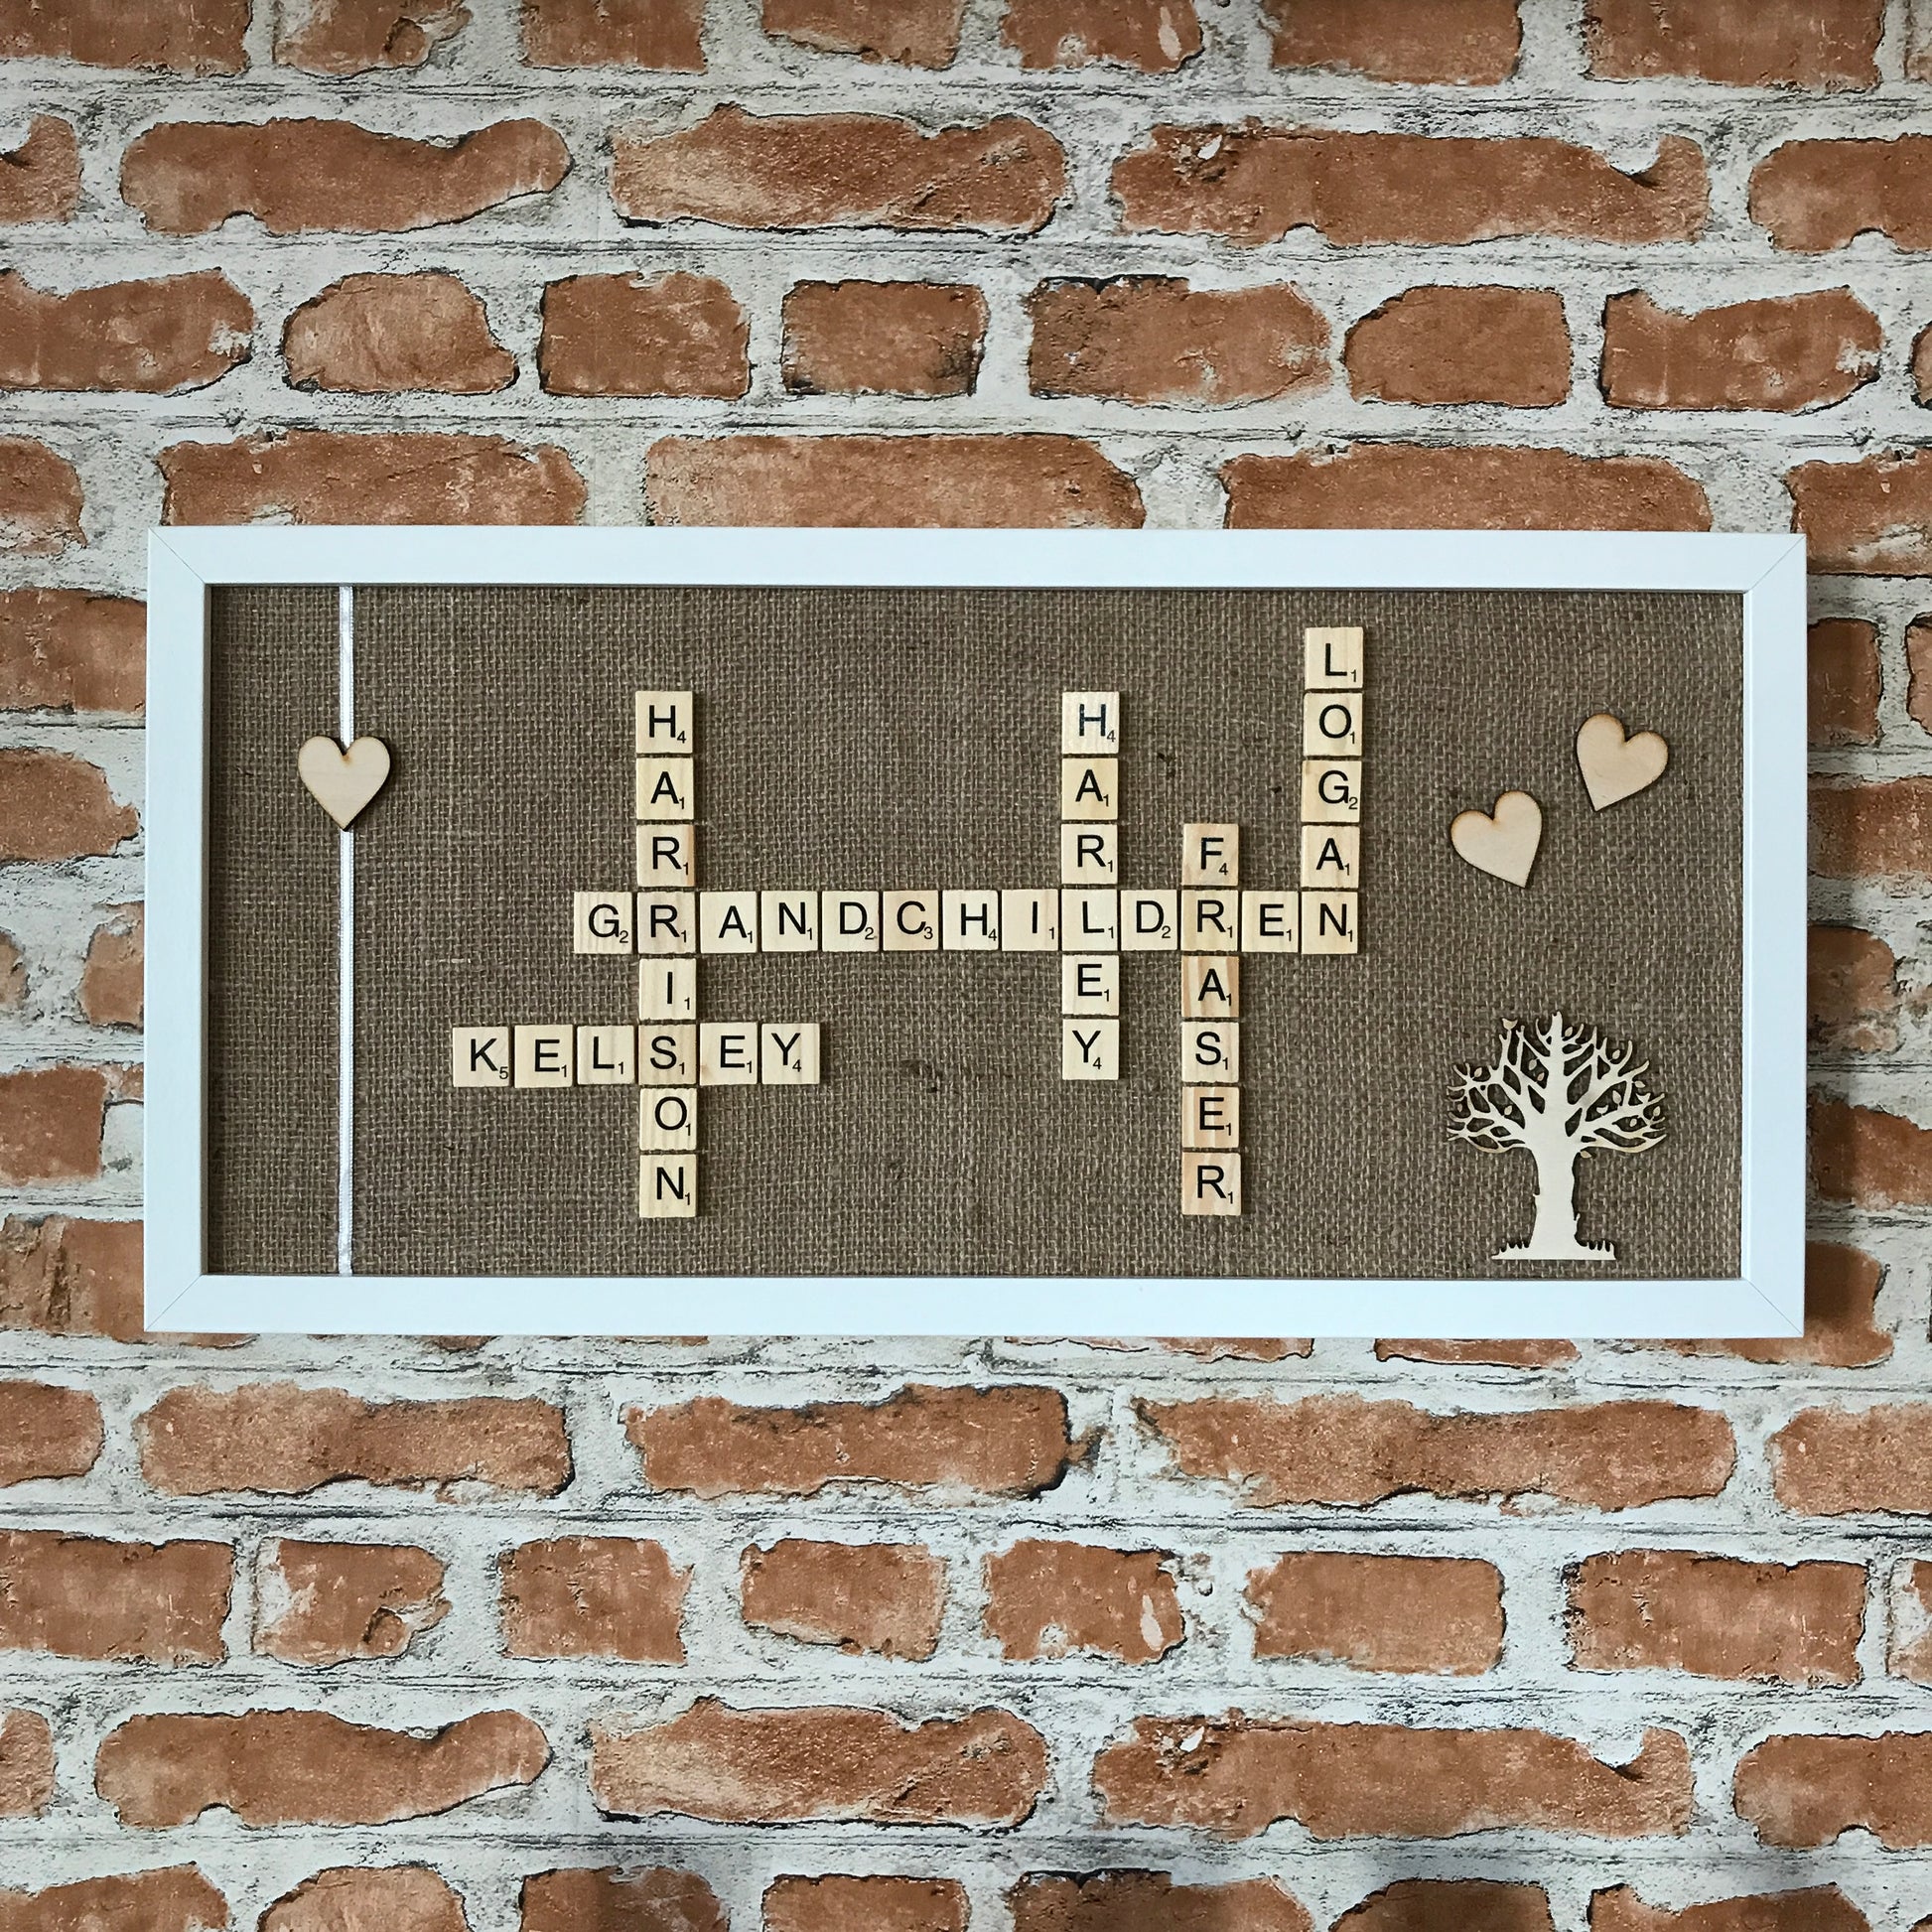 Grandchildren Scrabble Frame for Grandparents from The Wrong End of Town